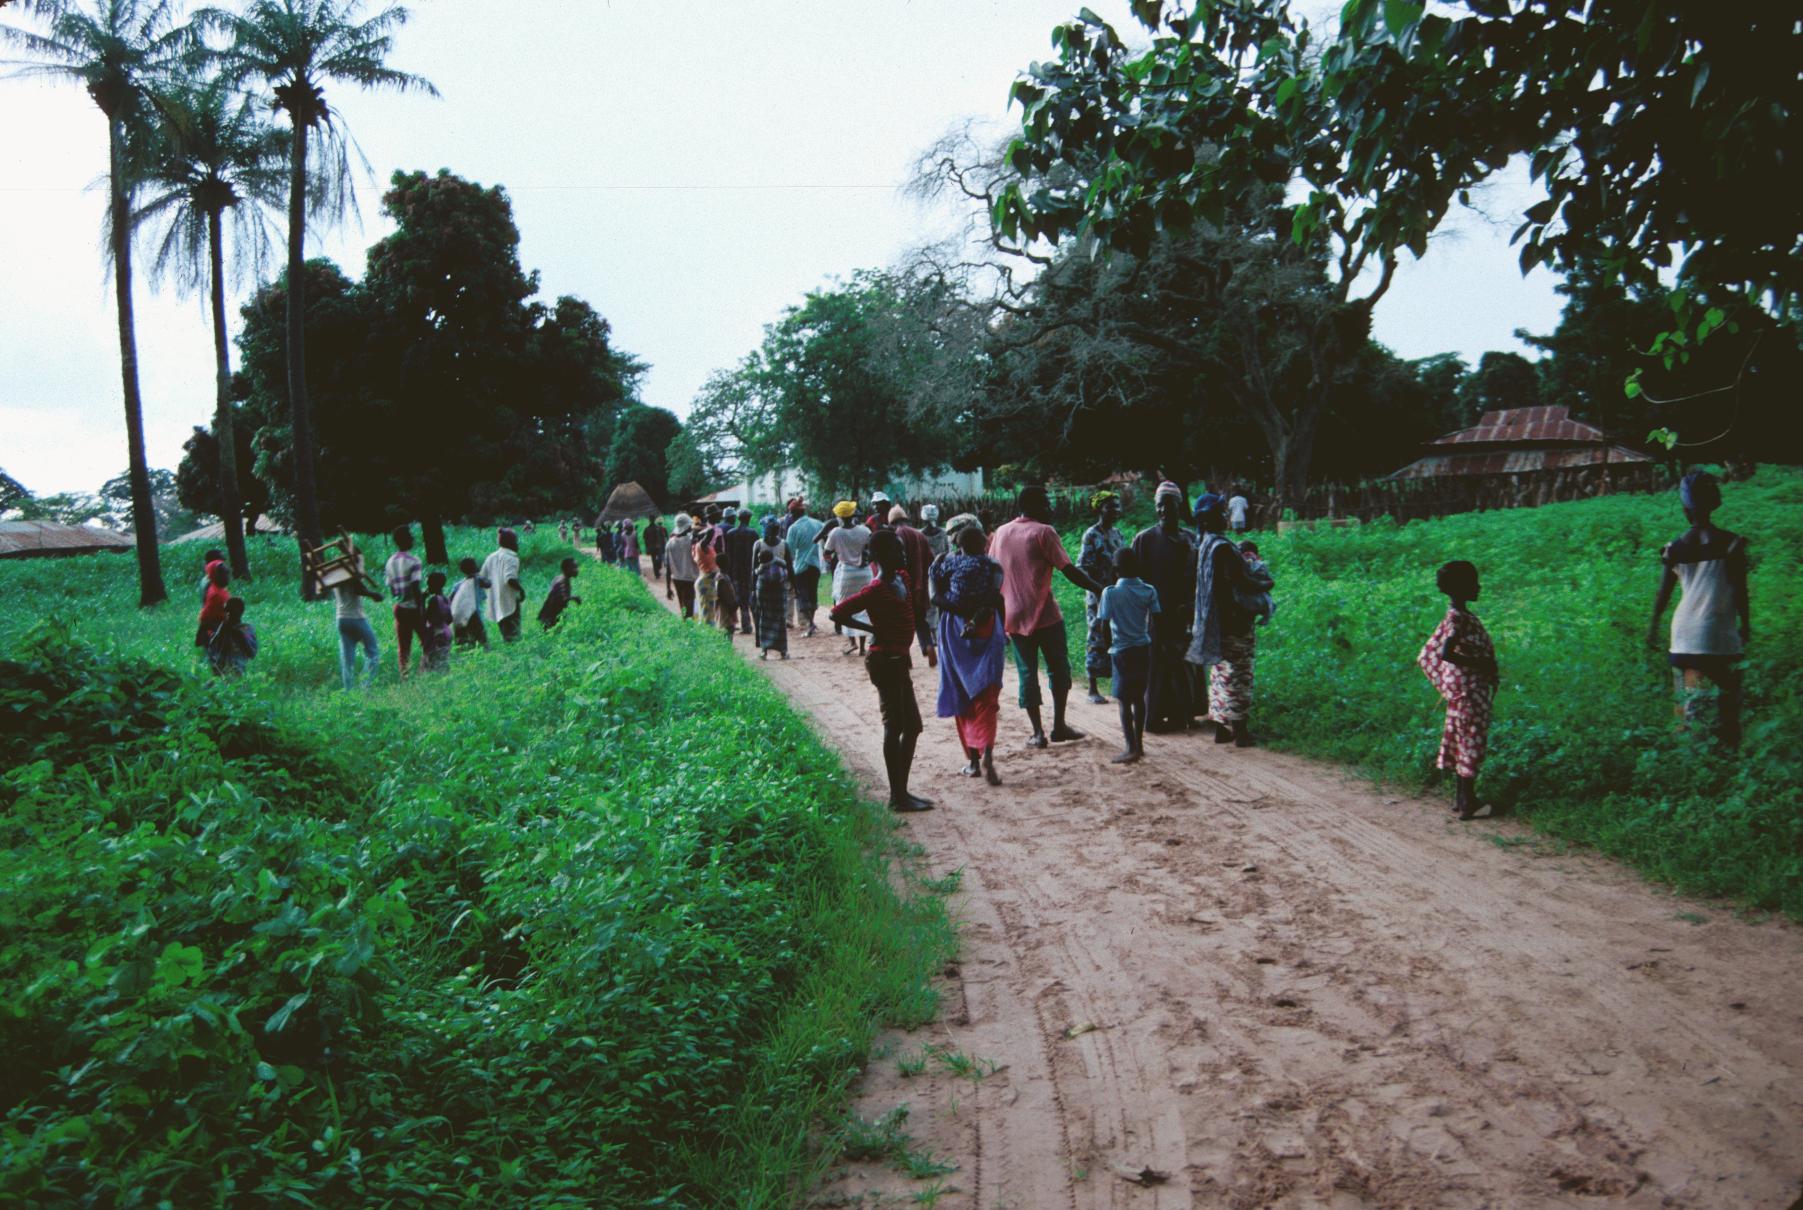 Country Road with Many Gambians Walking on It